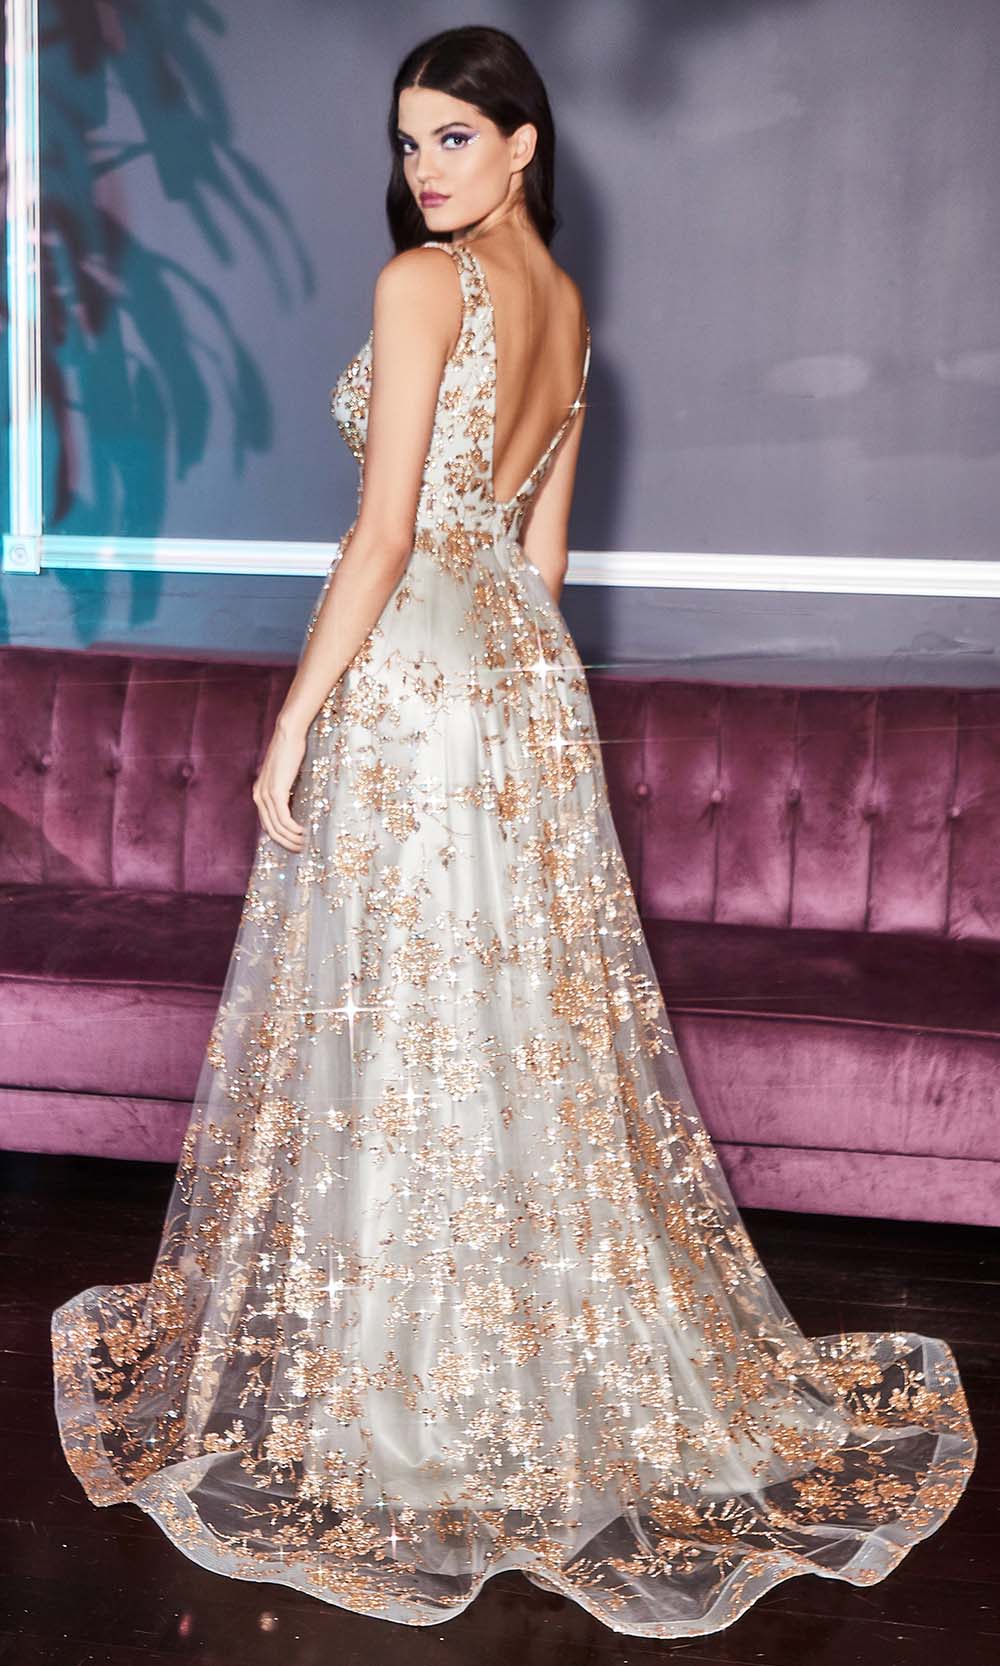 Cinderella Divine - CB068 Plunging V Neck Floral Metallic Print Gown In Champagne and Gold